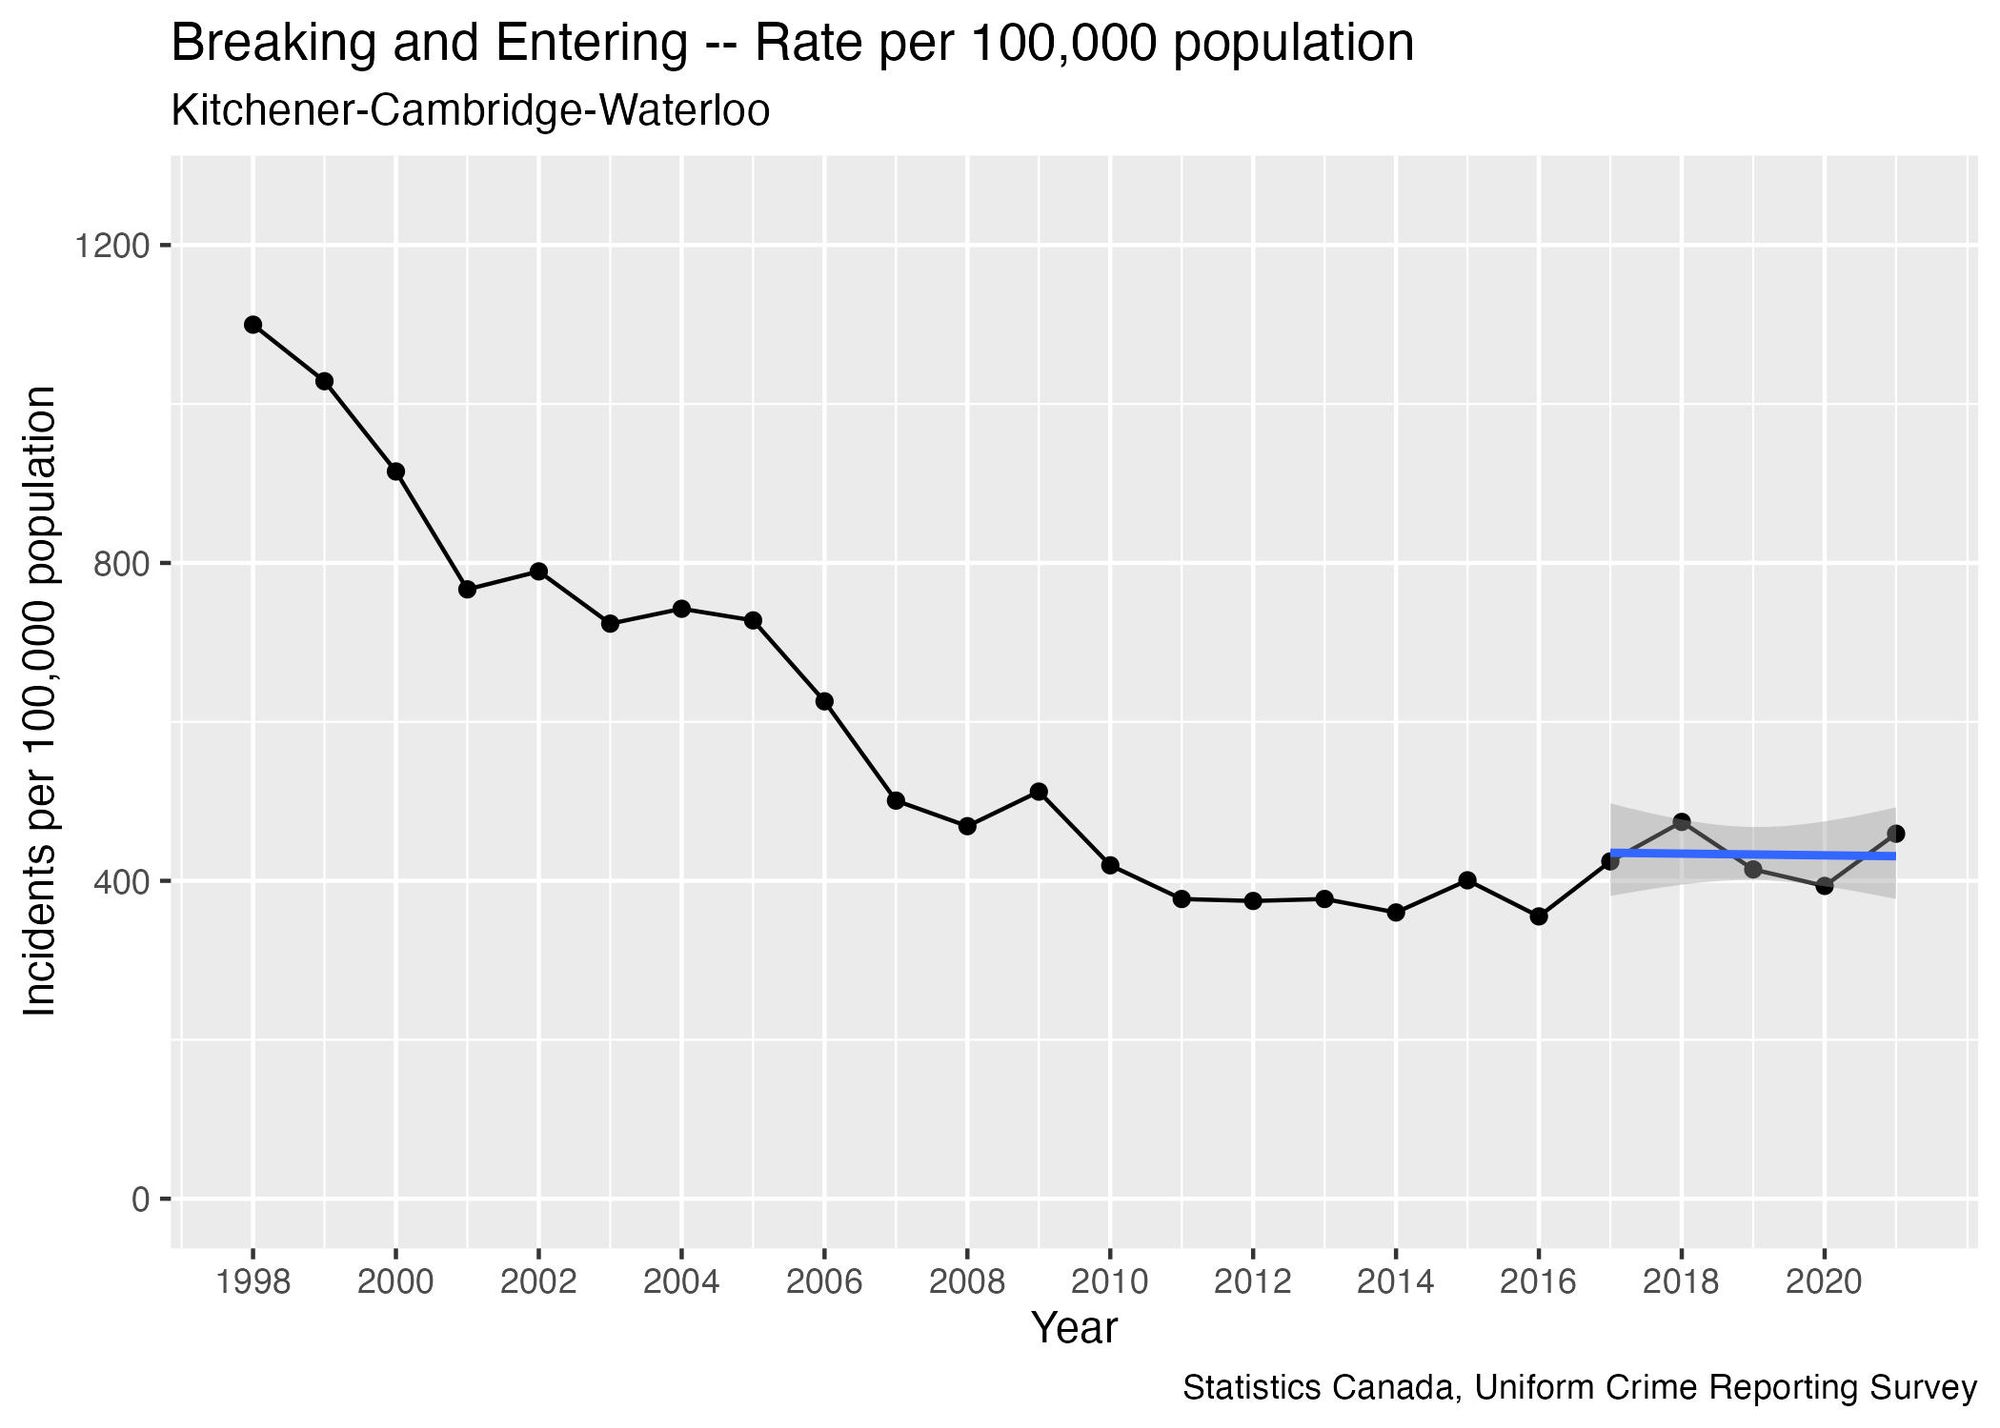 A graph of “Breaking and Entering – Rate per 100,000 population” for Kitchener-Cambridge-Waterloo. The graph starts out around 1100 range in 1998, then gradually decreases to a level around 400 by 2010, and stays close to 400 thereafter. A blue line, nearly horizontal, has been overlaid on the years 2017-2021.